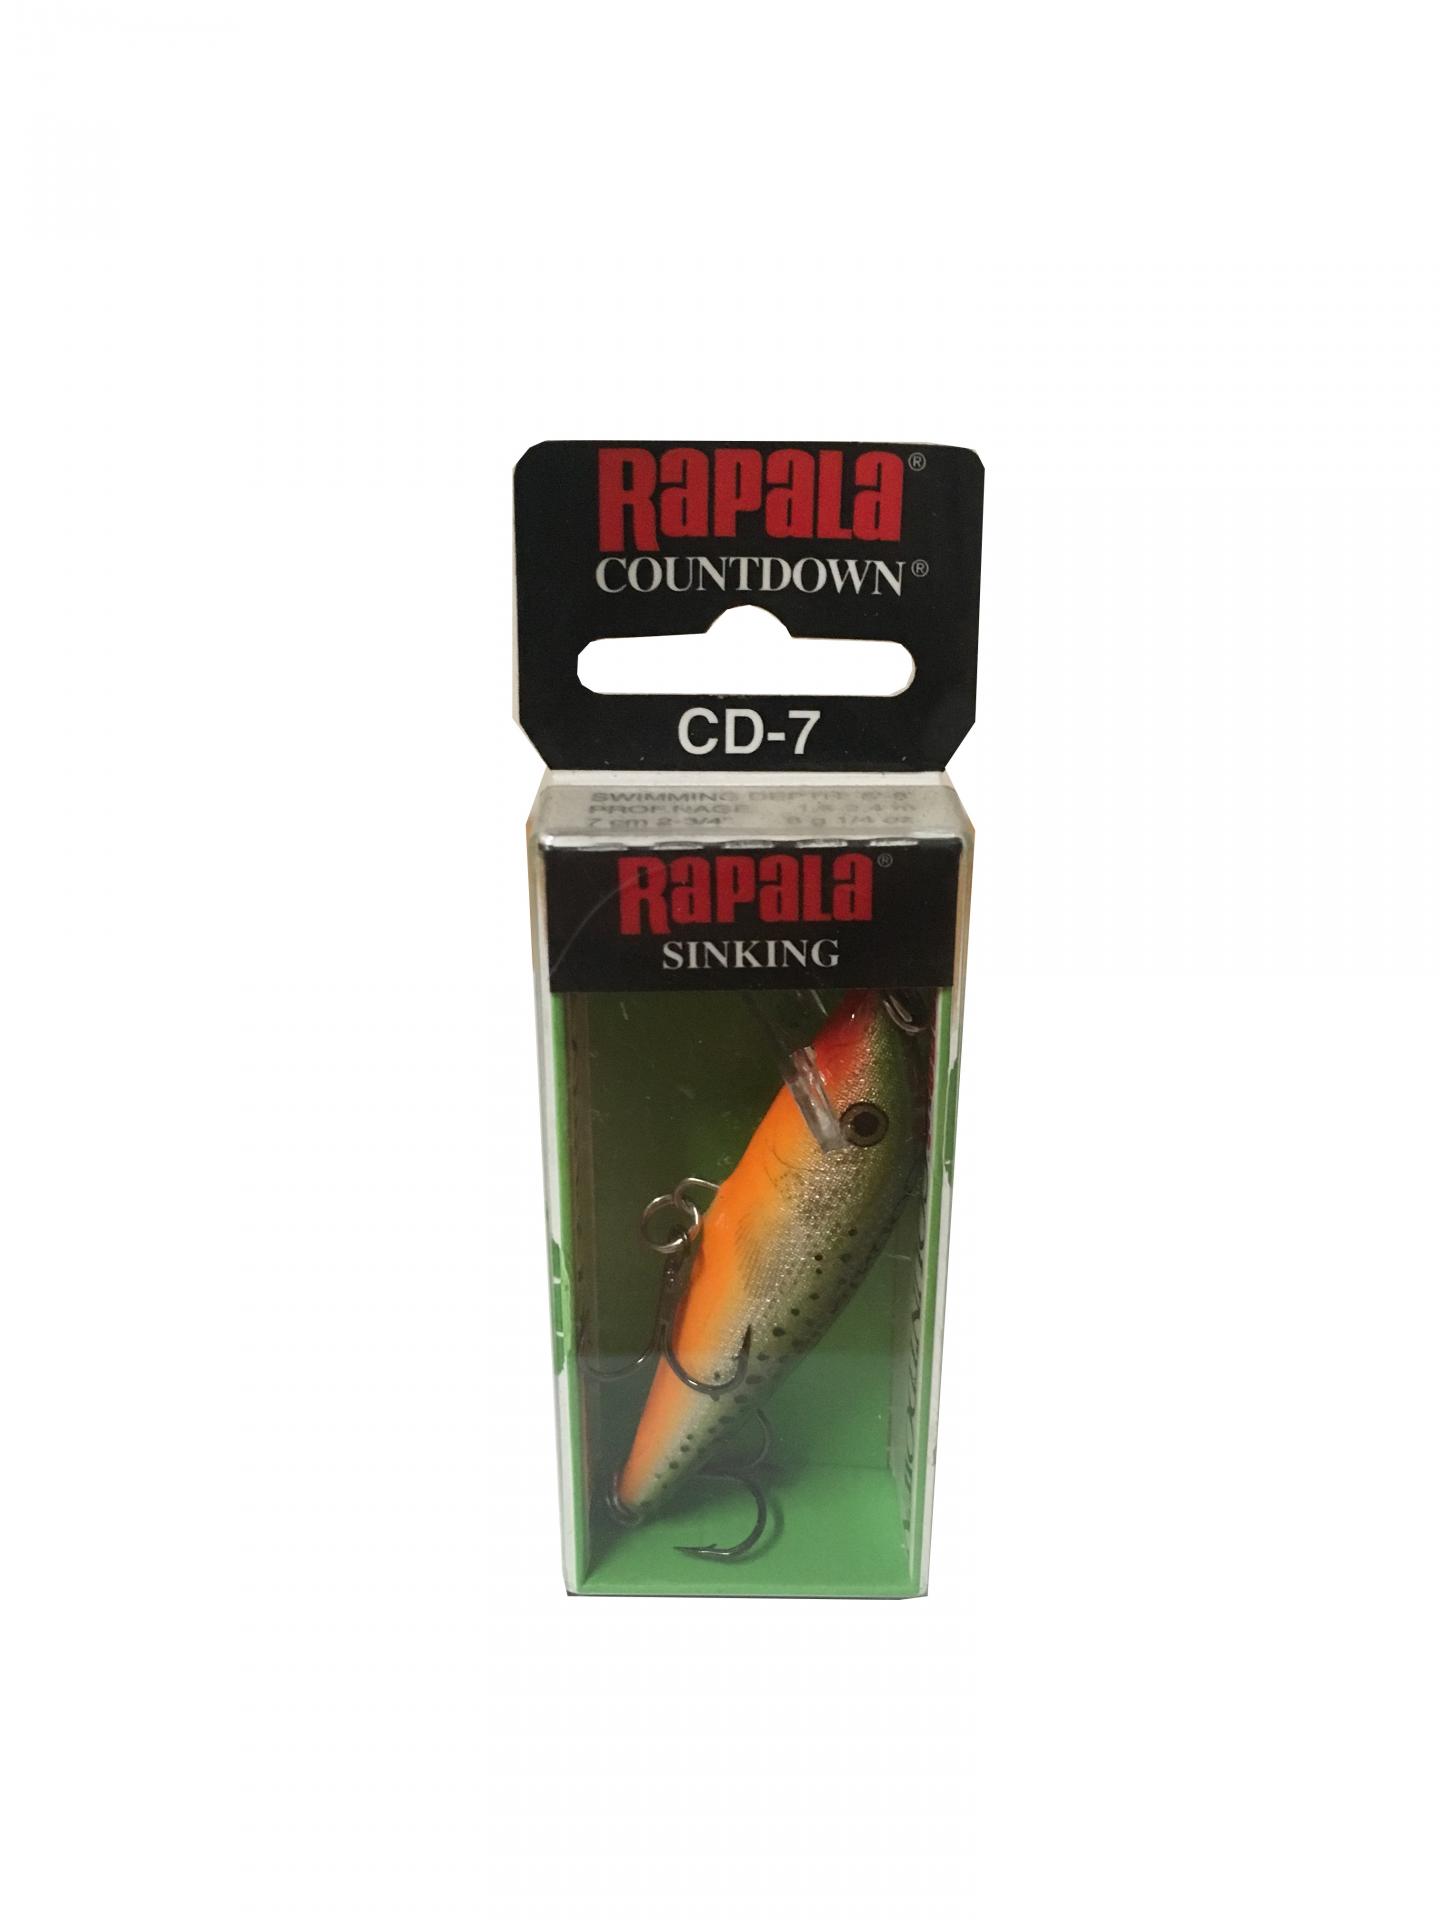 Rapala Countdown Sinking CD07 RFSM Redfin Spooted Minow